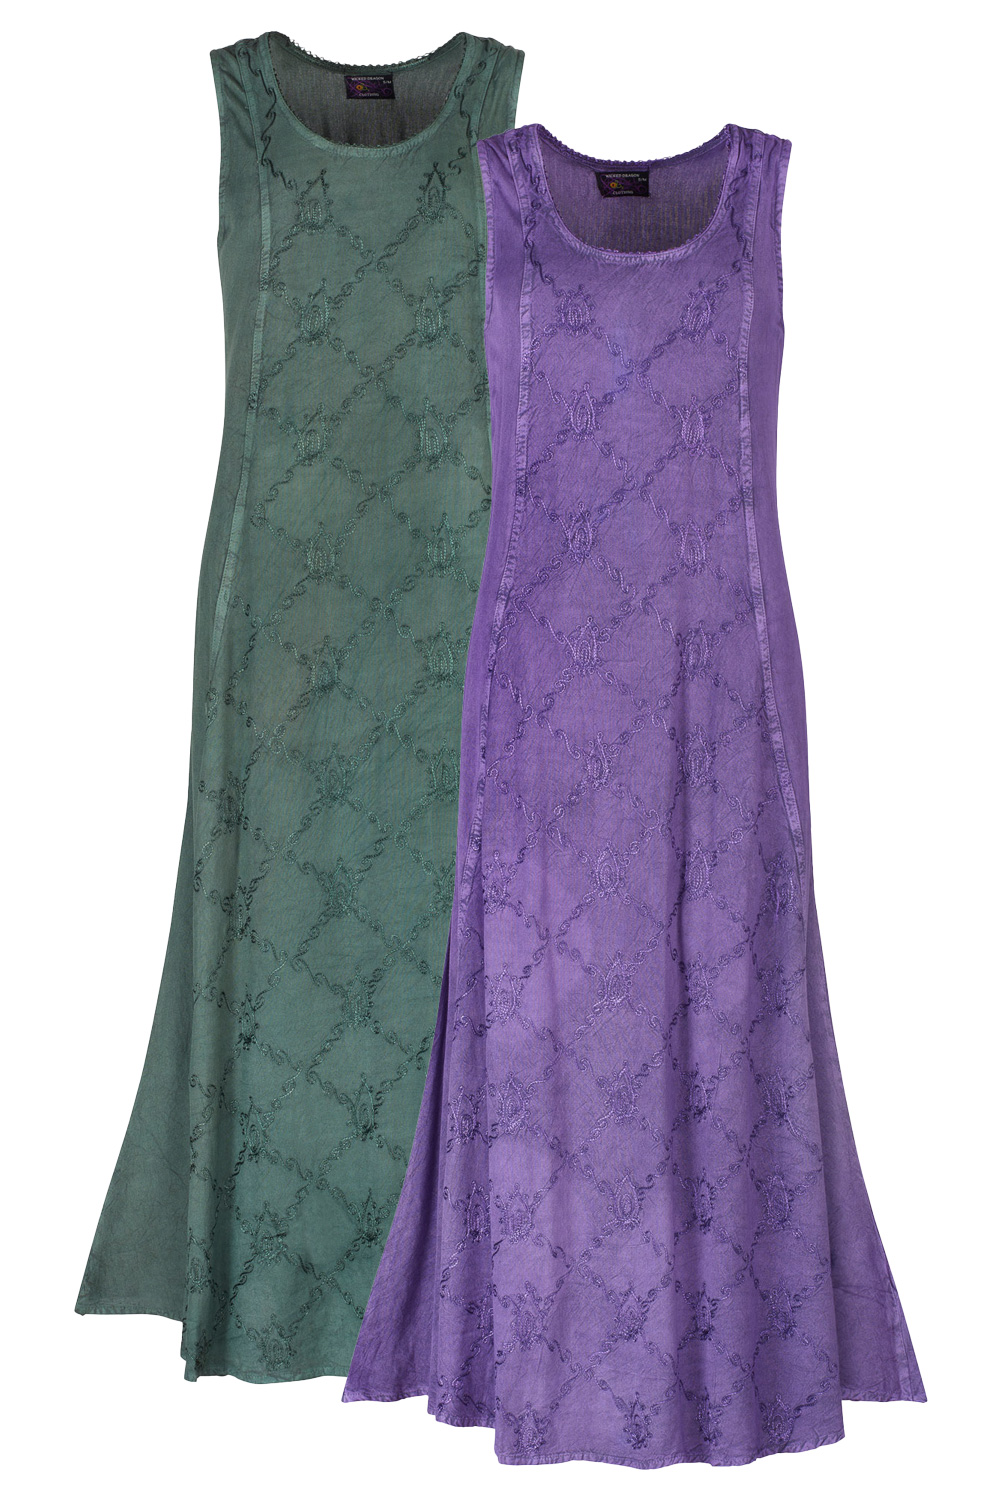 Wicked Dragon Clothing - Embroidered sleeveless dress